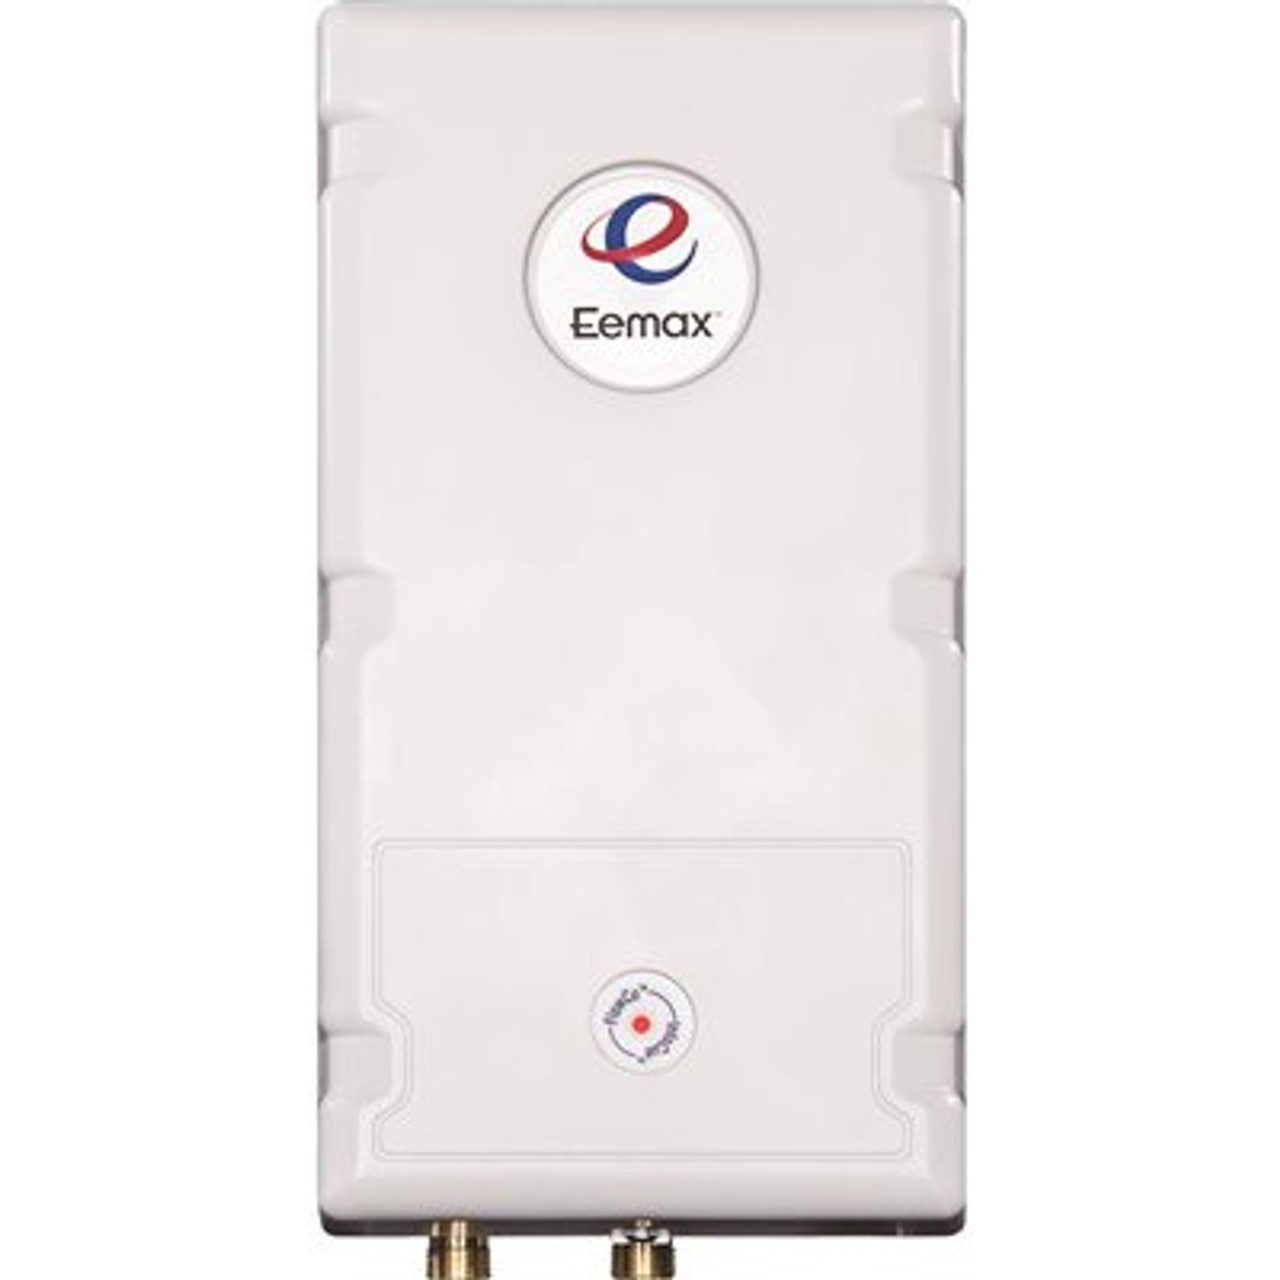 Eemax FlowCo 6 kW, 277 Volt Commercial Electric Tankless Water Heater